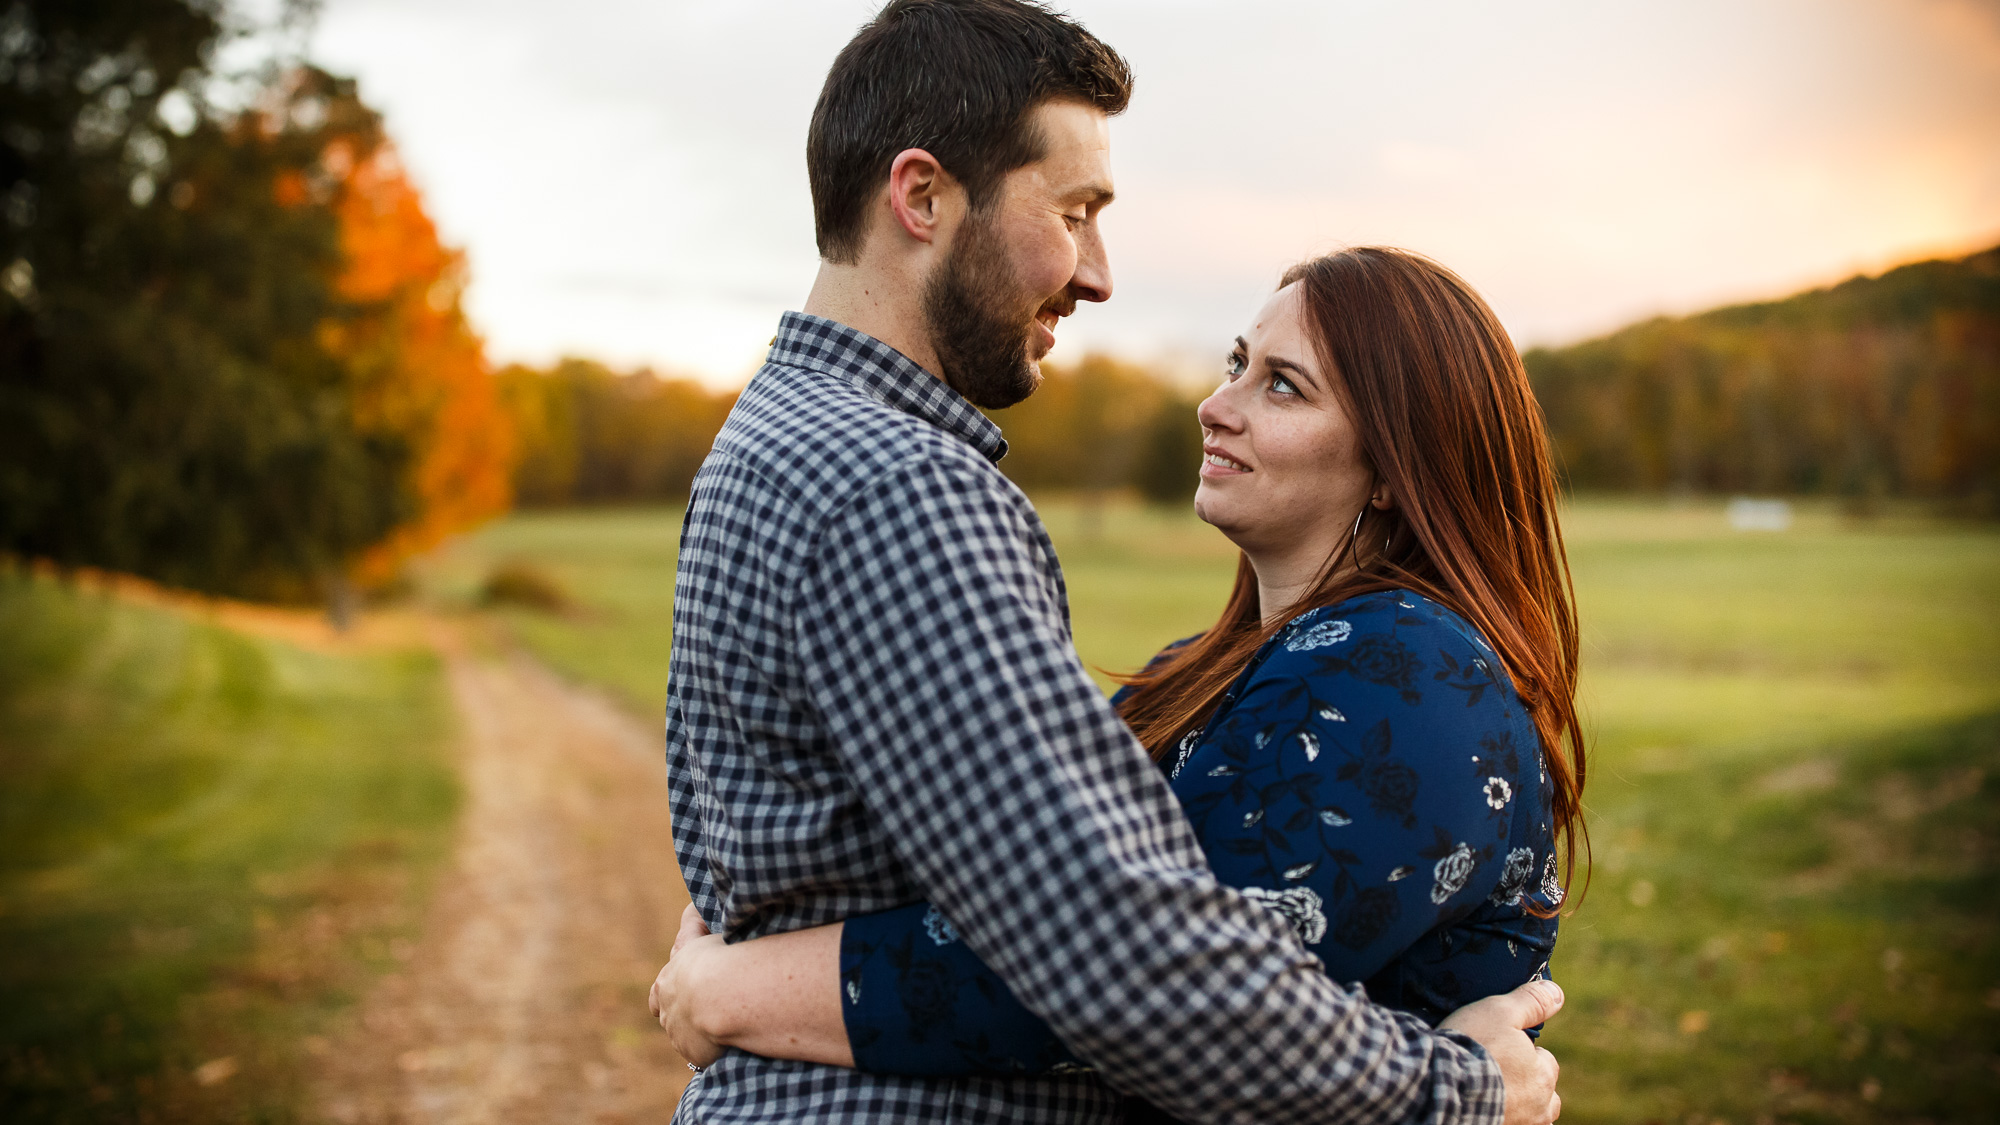 Engagement photographers in CT